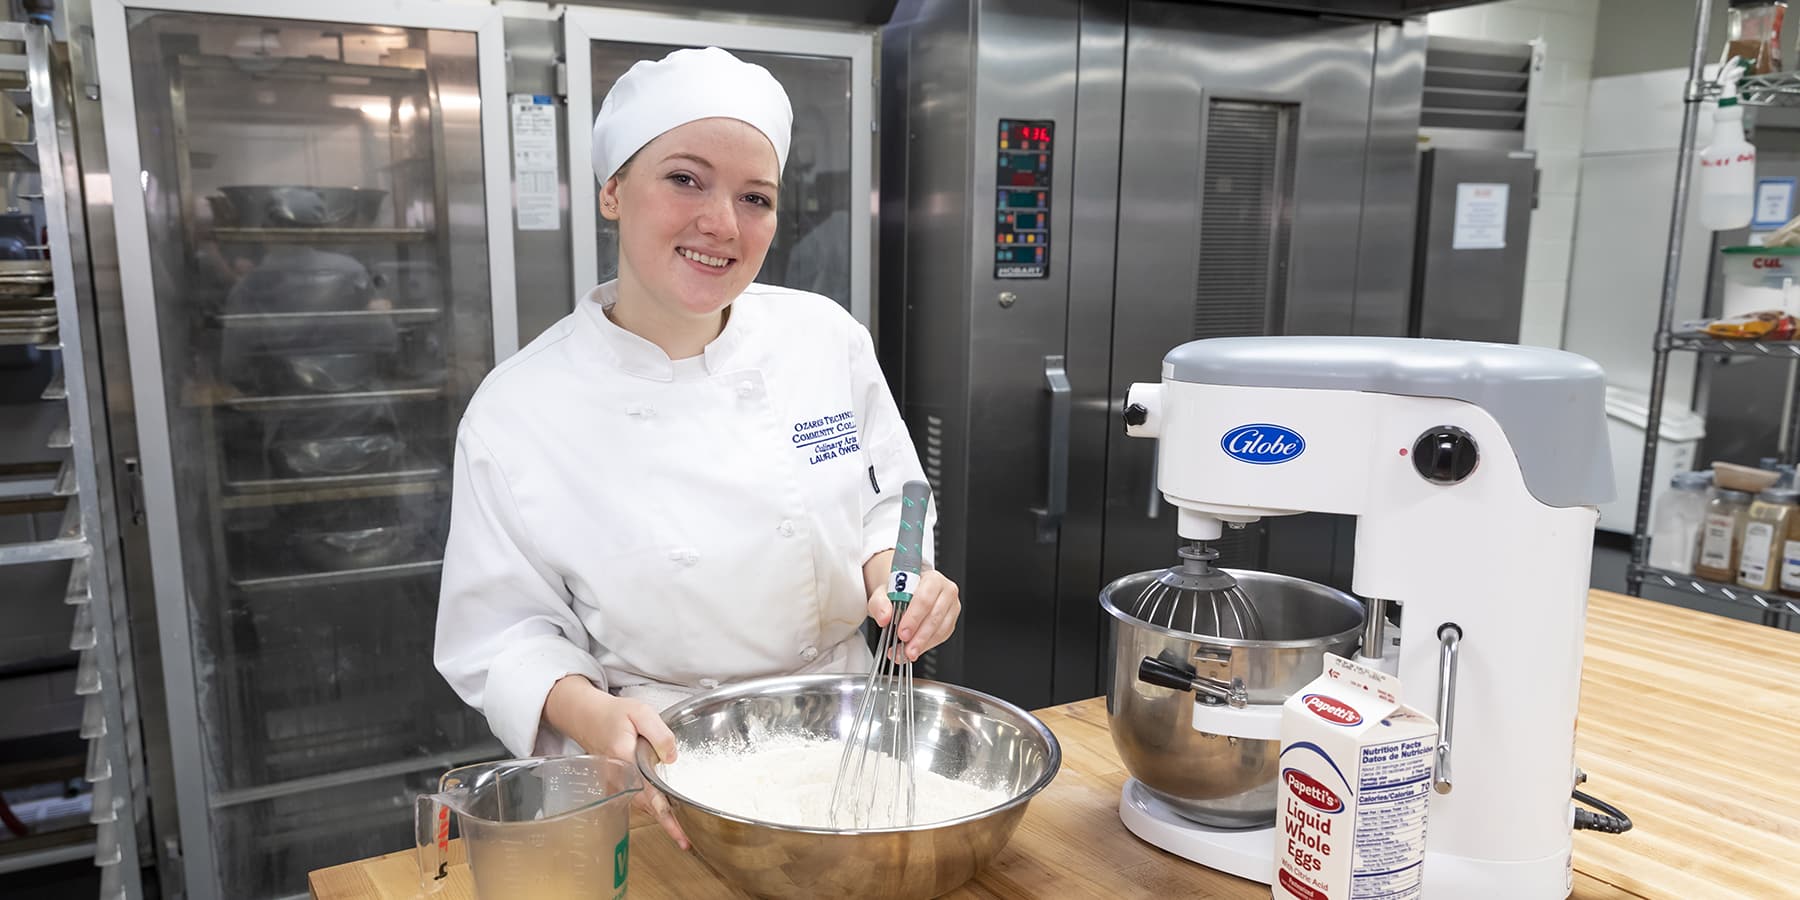 Laura Owens, culinary student